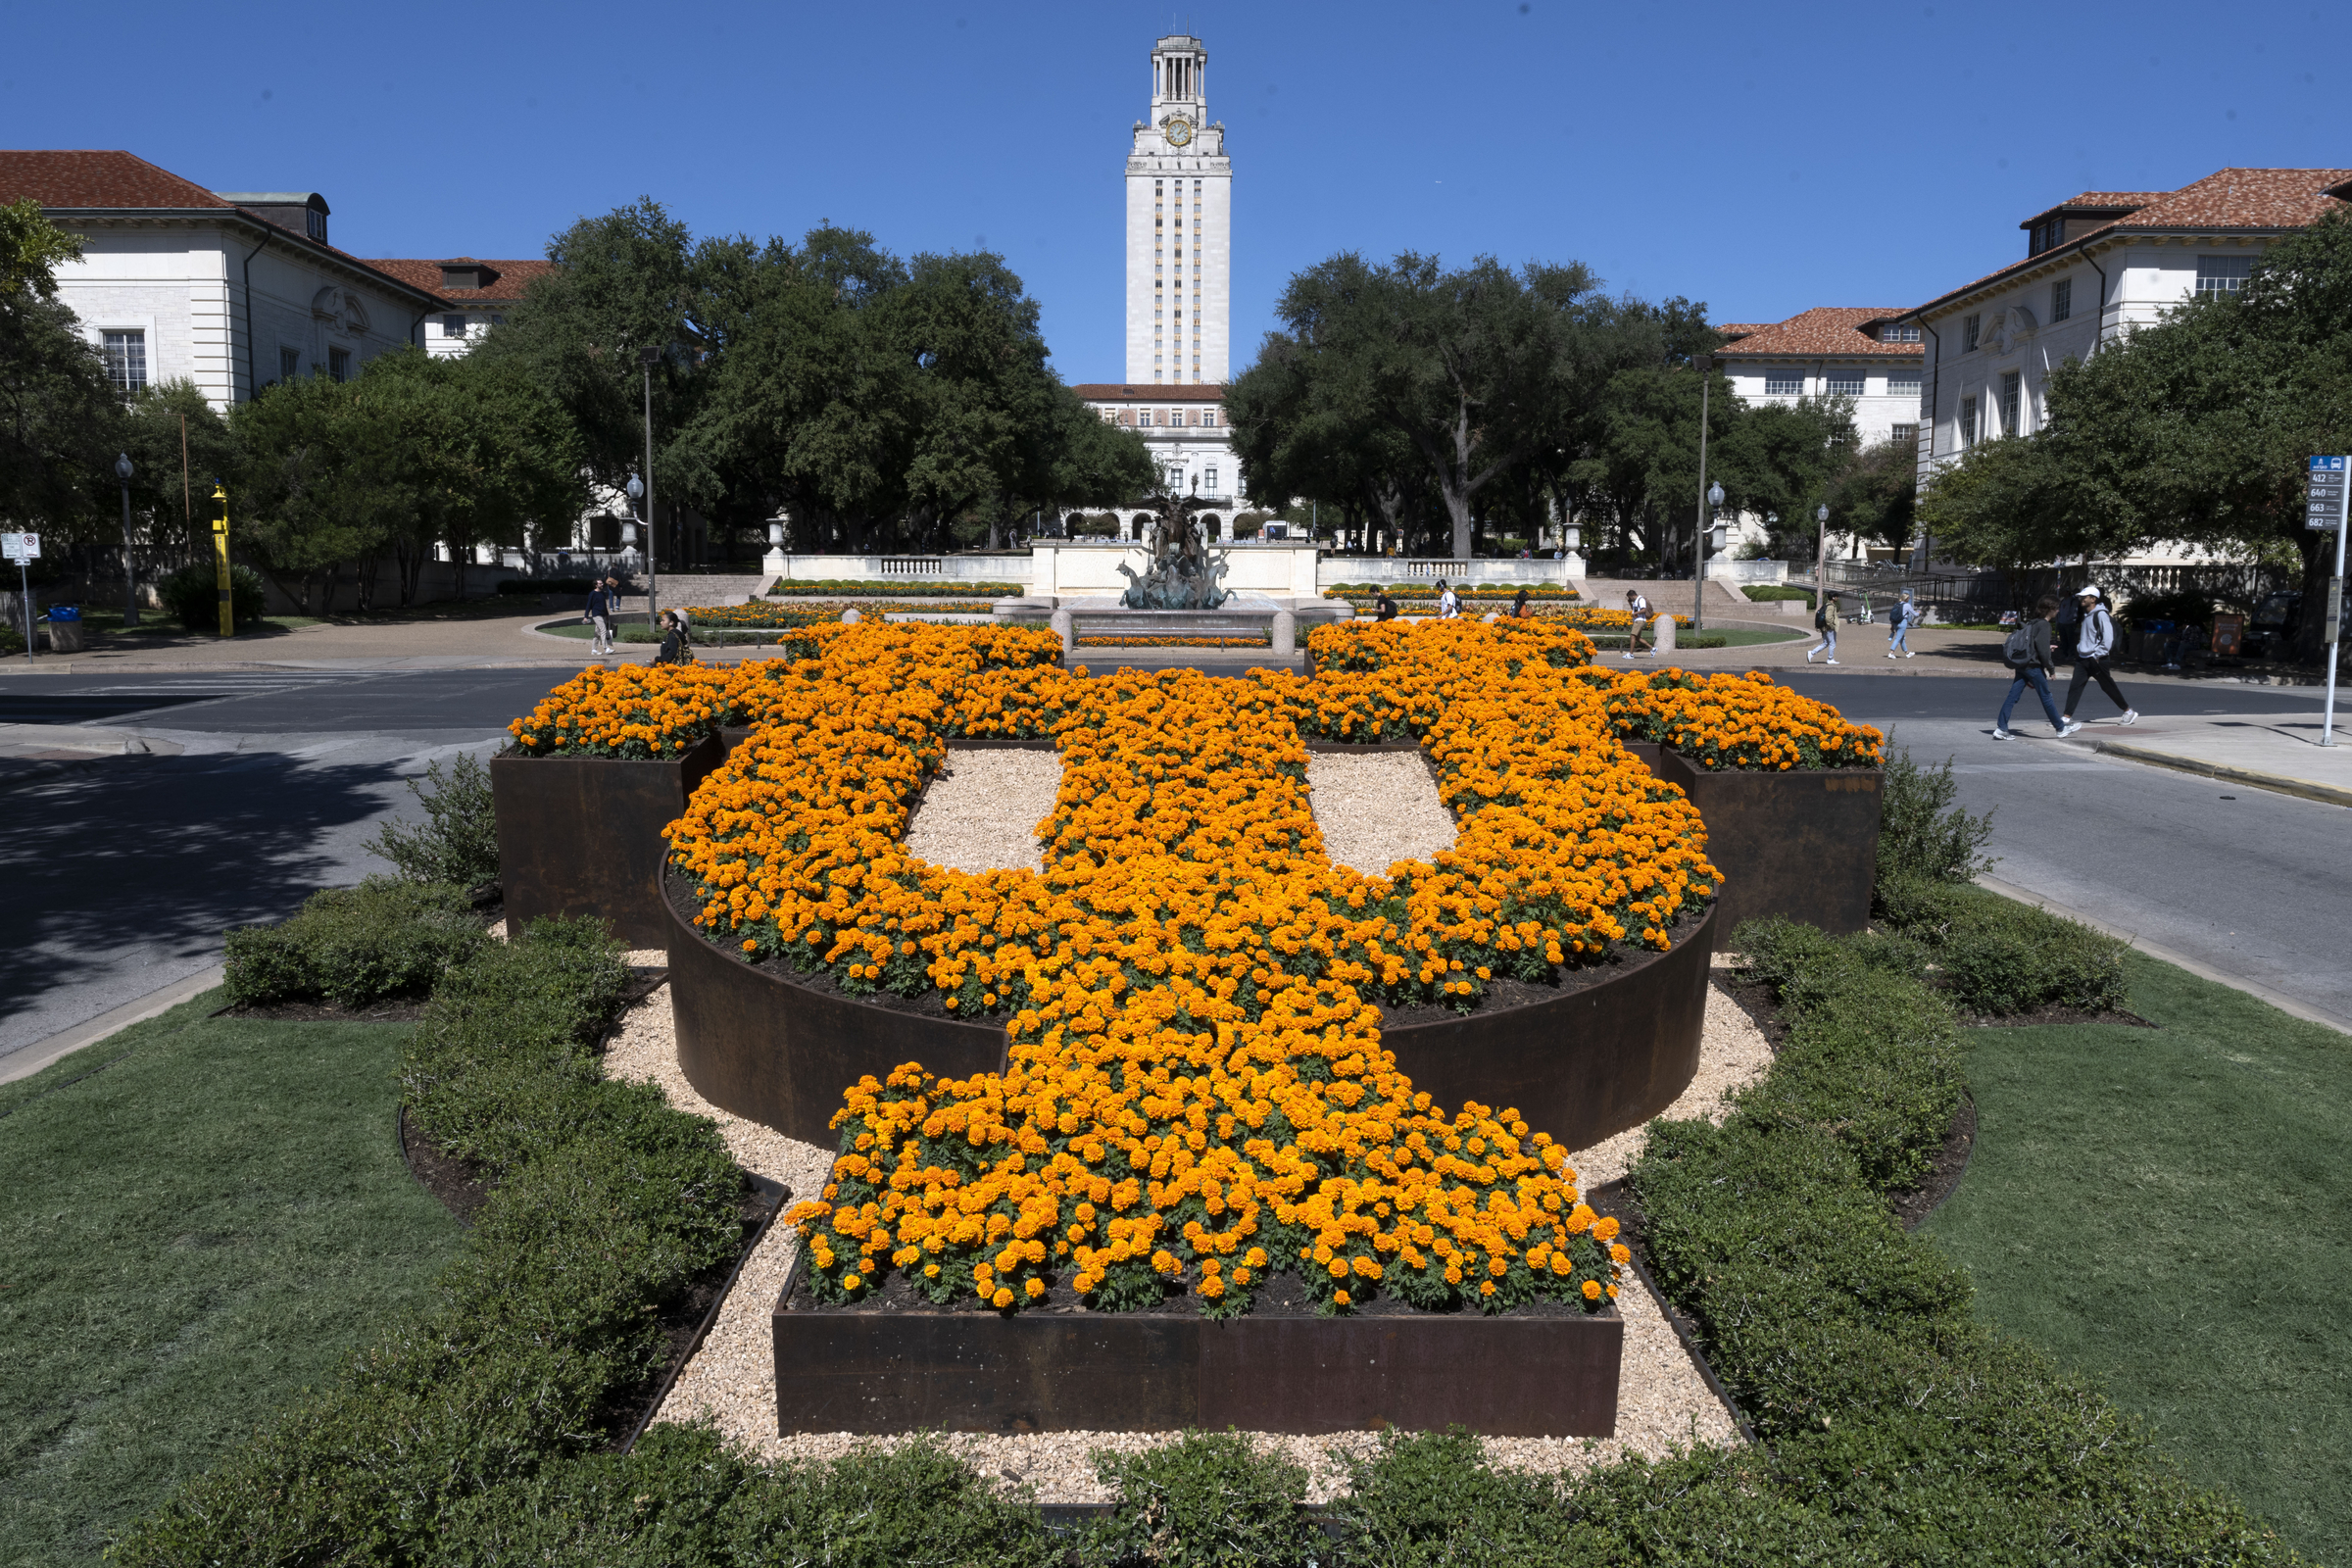 UT is spelled in flowers south of the main mall with the UT Tower in the distance